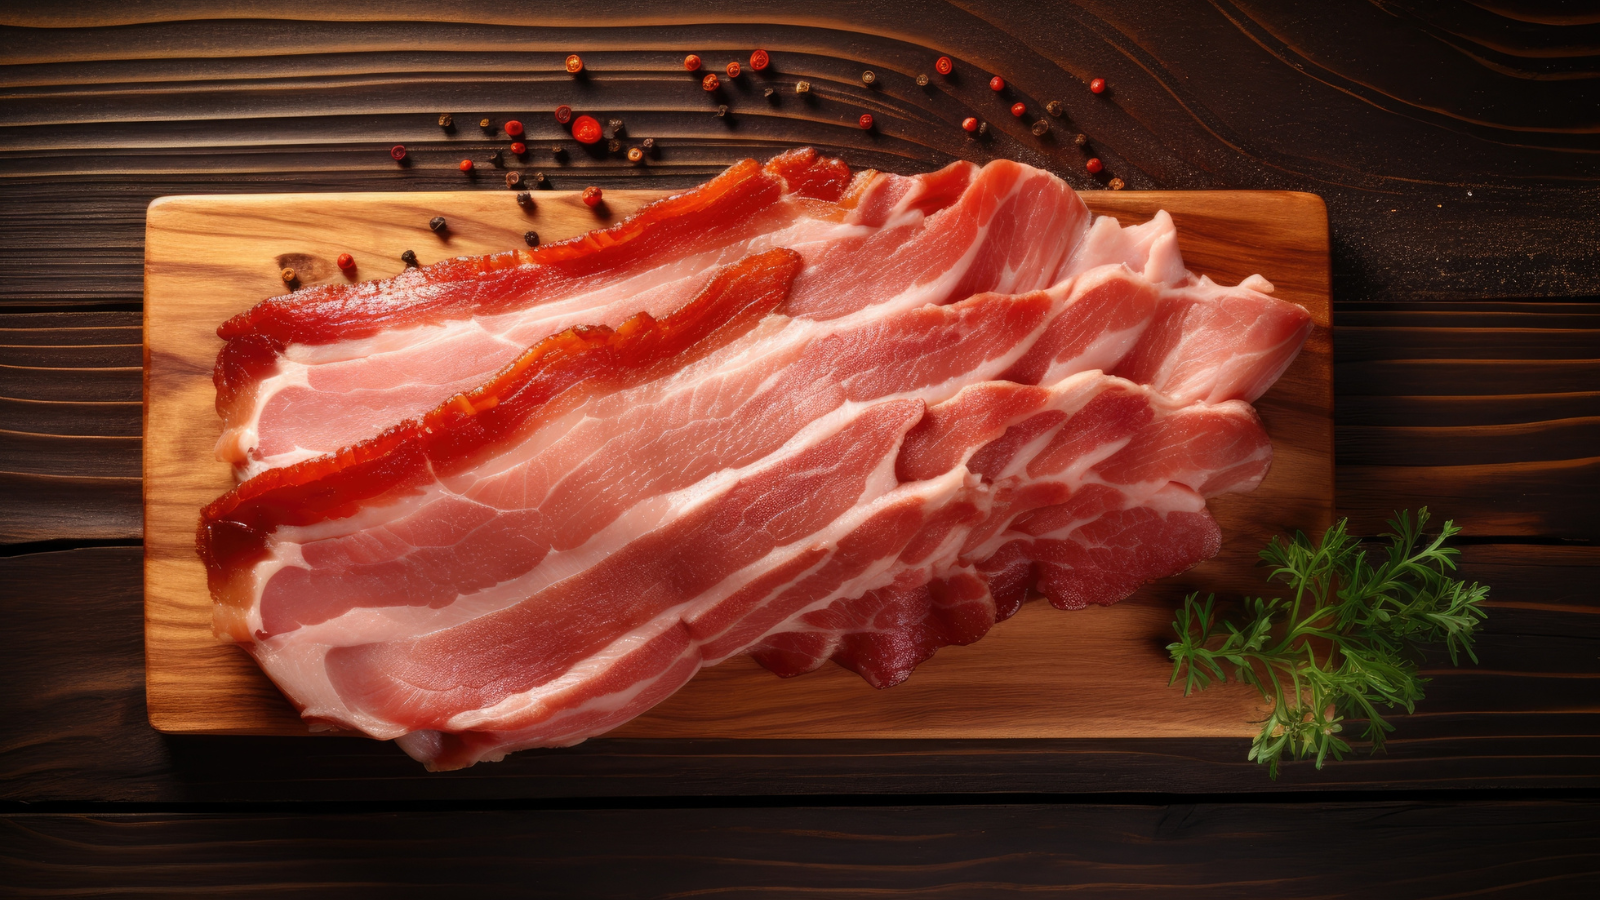 Bacon on a wooden board